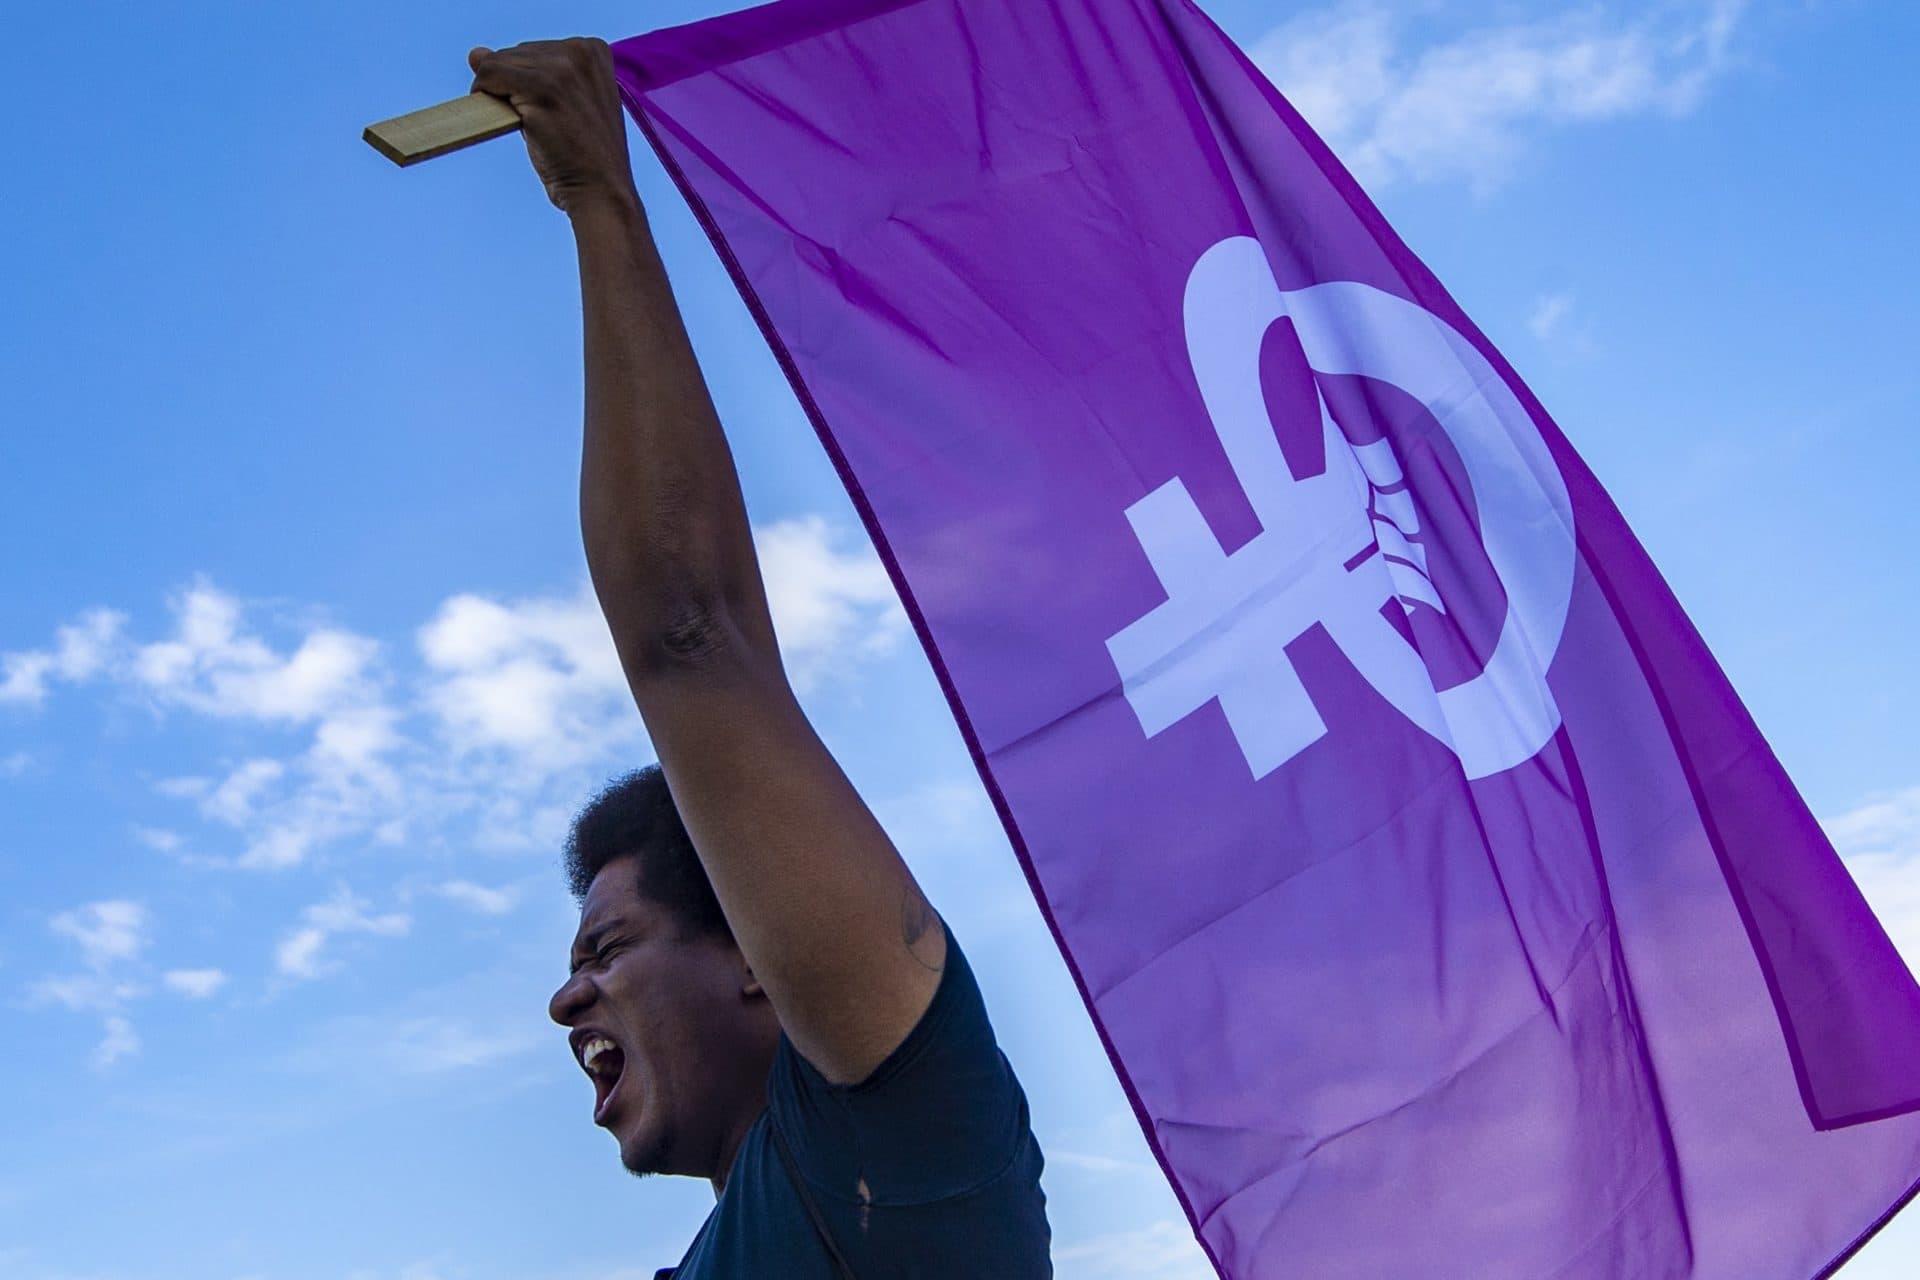 Stevie Downie cheers and raises a women’s rights flag during the Boston Rally to Defend Abortion at the Franklin Park Playstead. (Jesse Costa/WBUR)